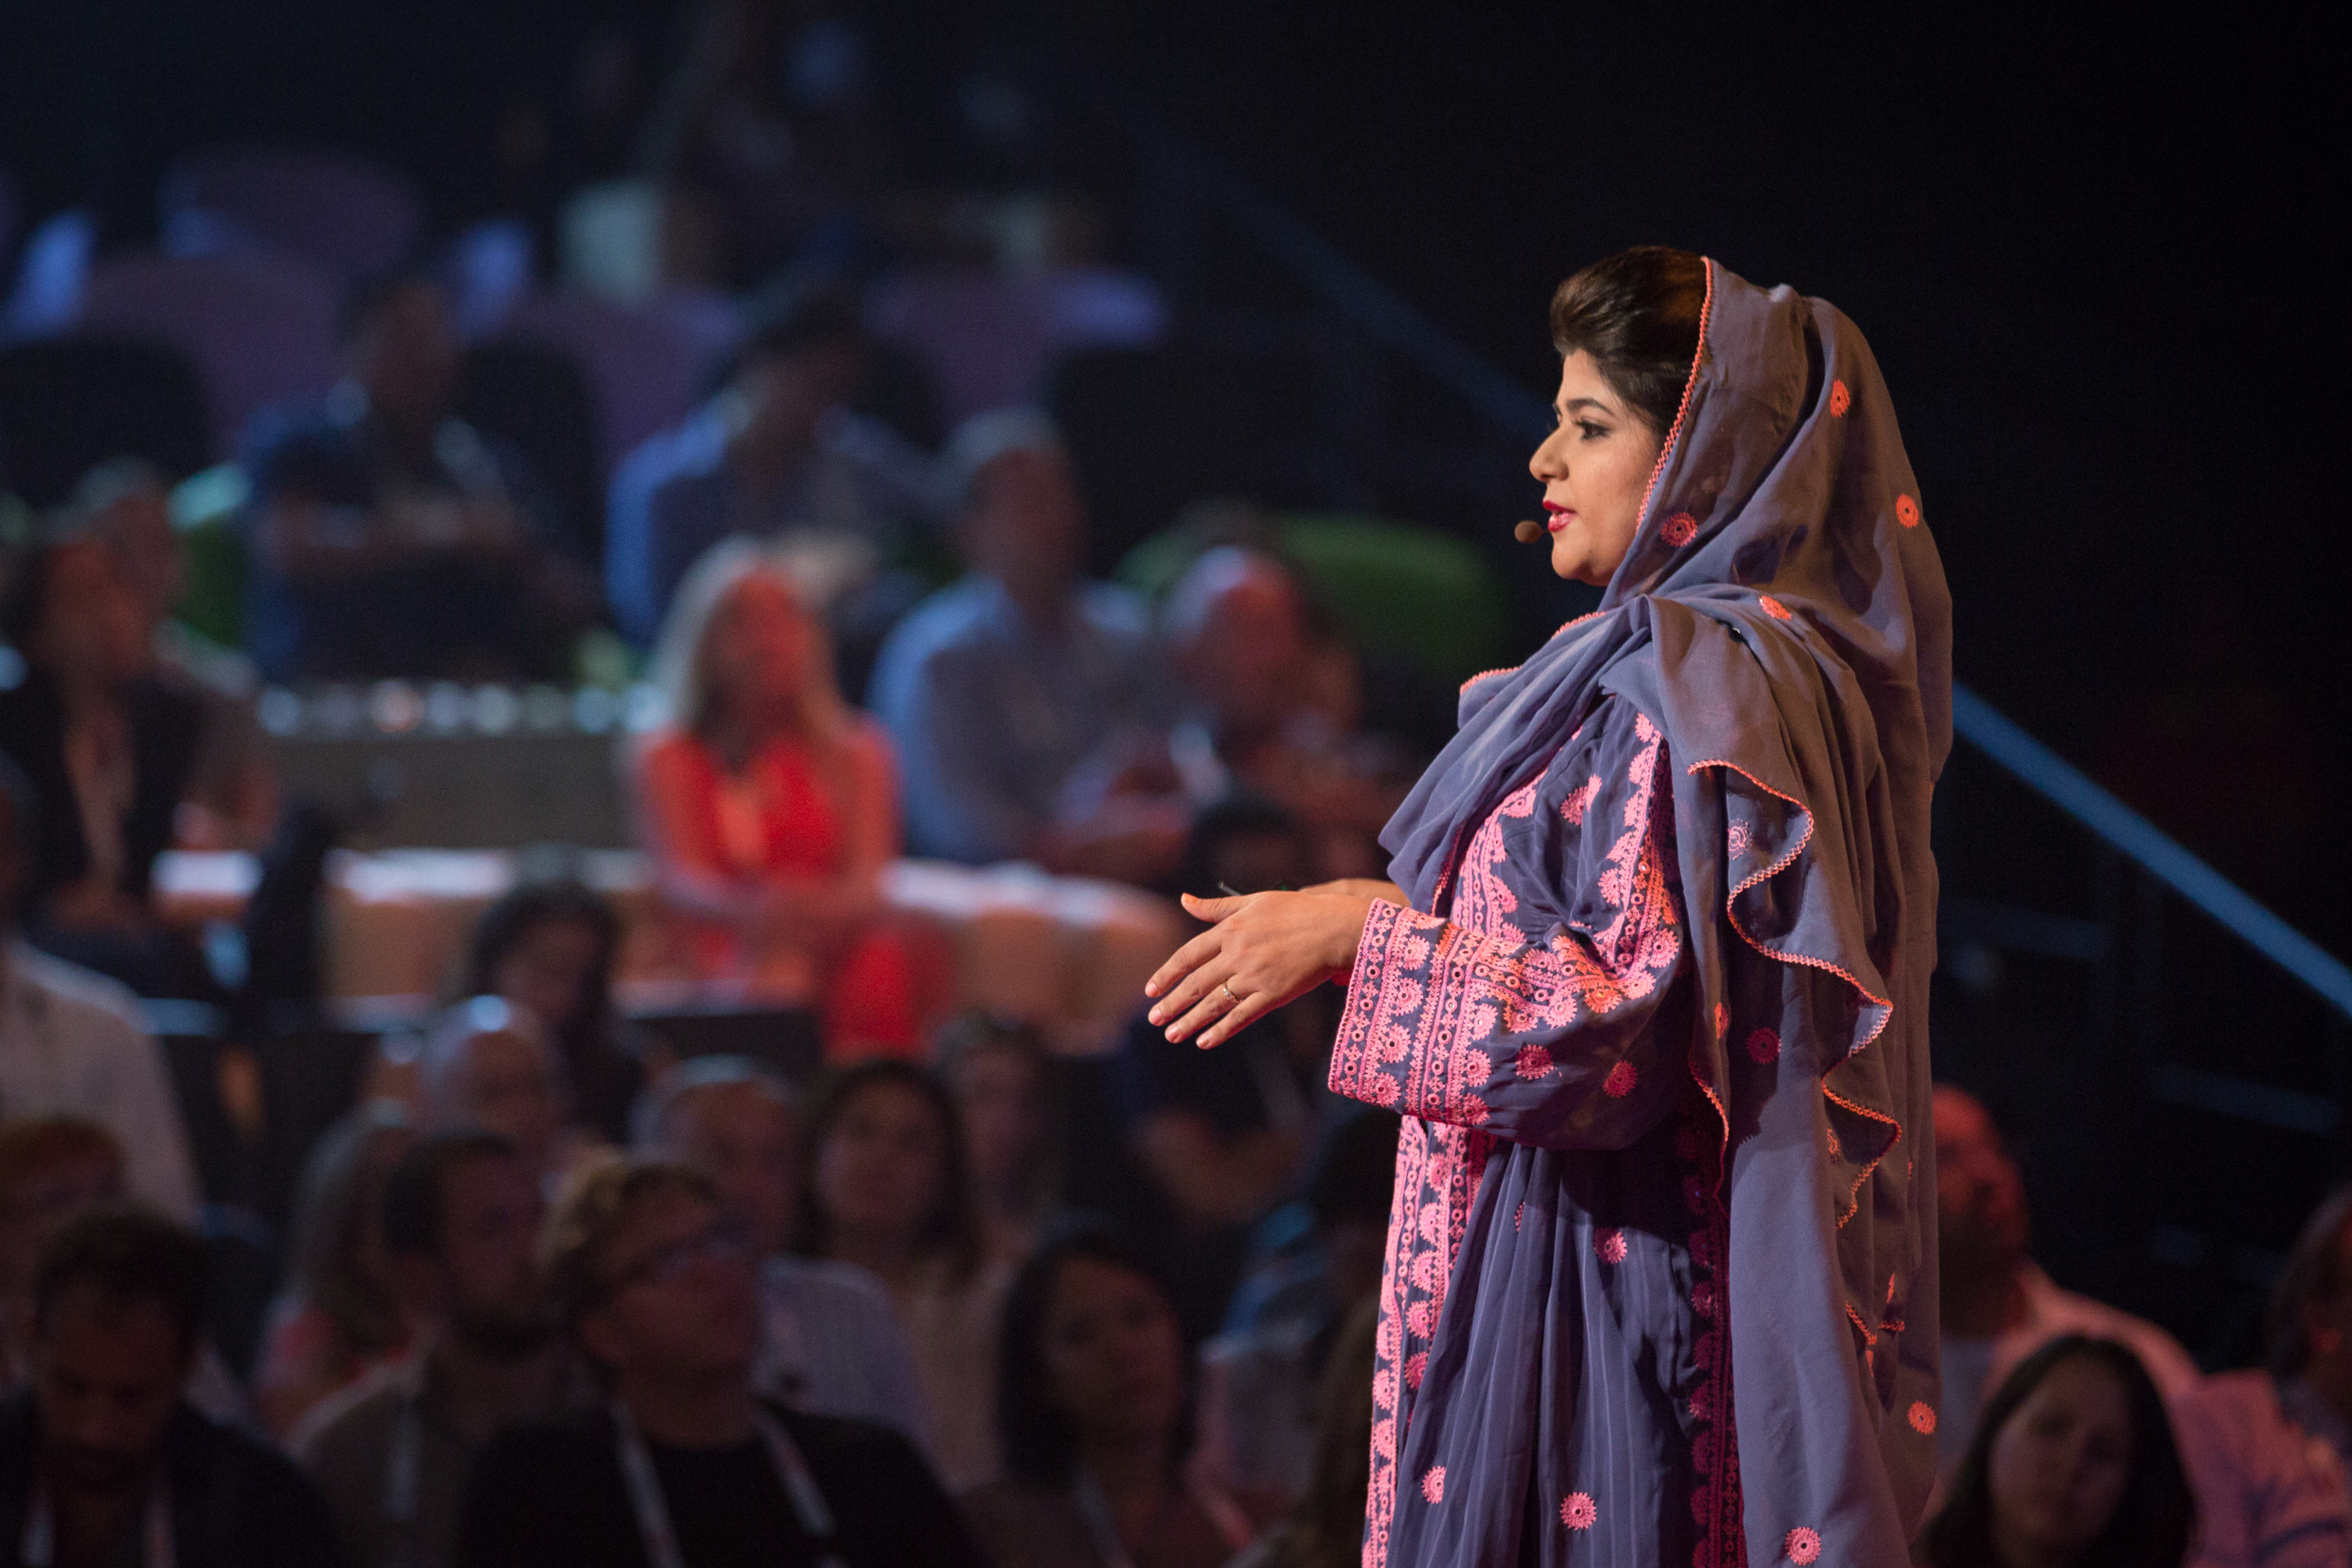 Embroidery for empowerment: A Q&A with Khalida Brohi that reveals much
more of her incredible story